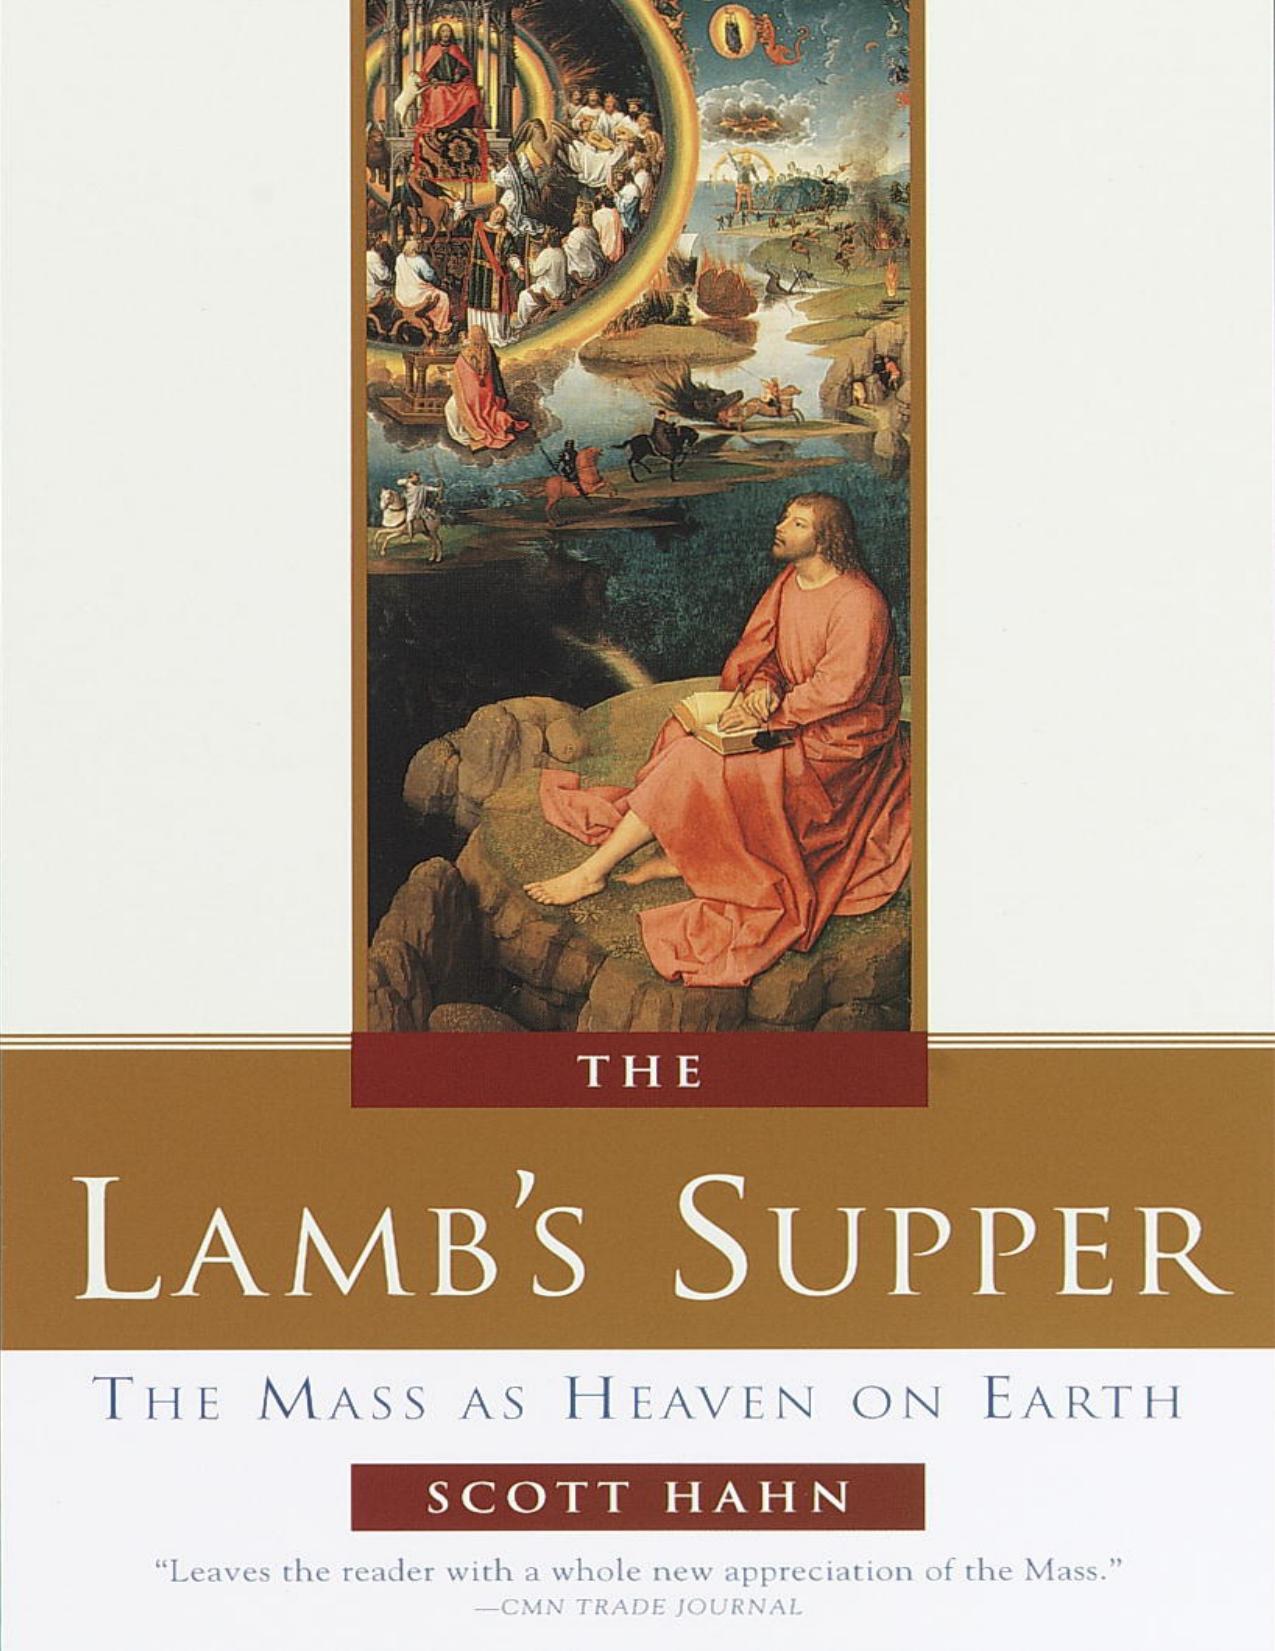 The Lamb's Supper: The Mass as Heaven on Earth by Scott Hahn